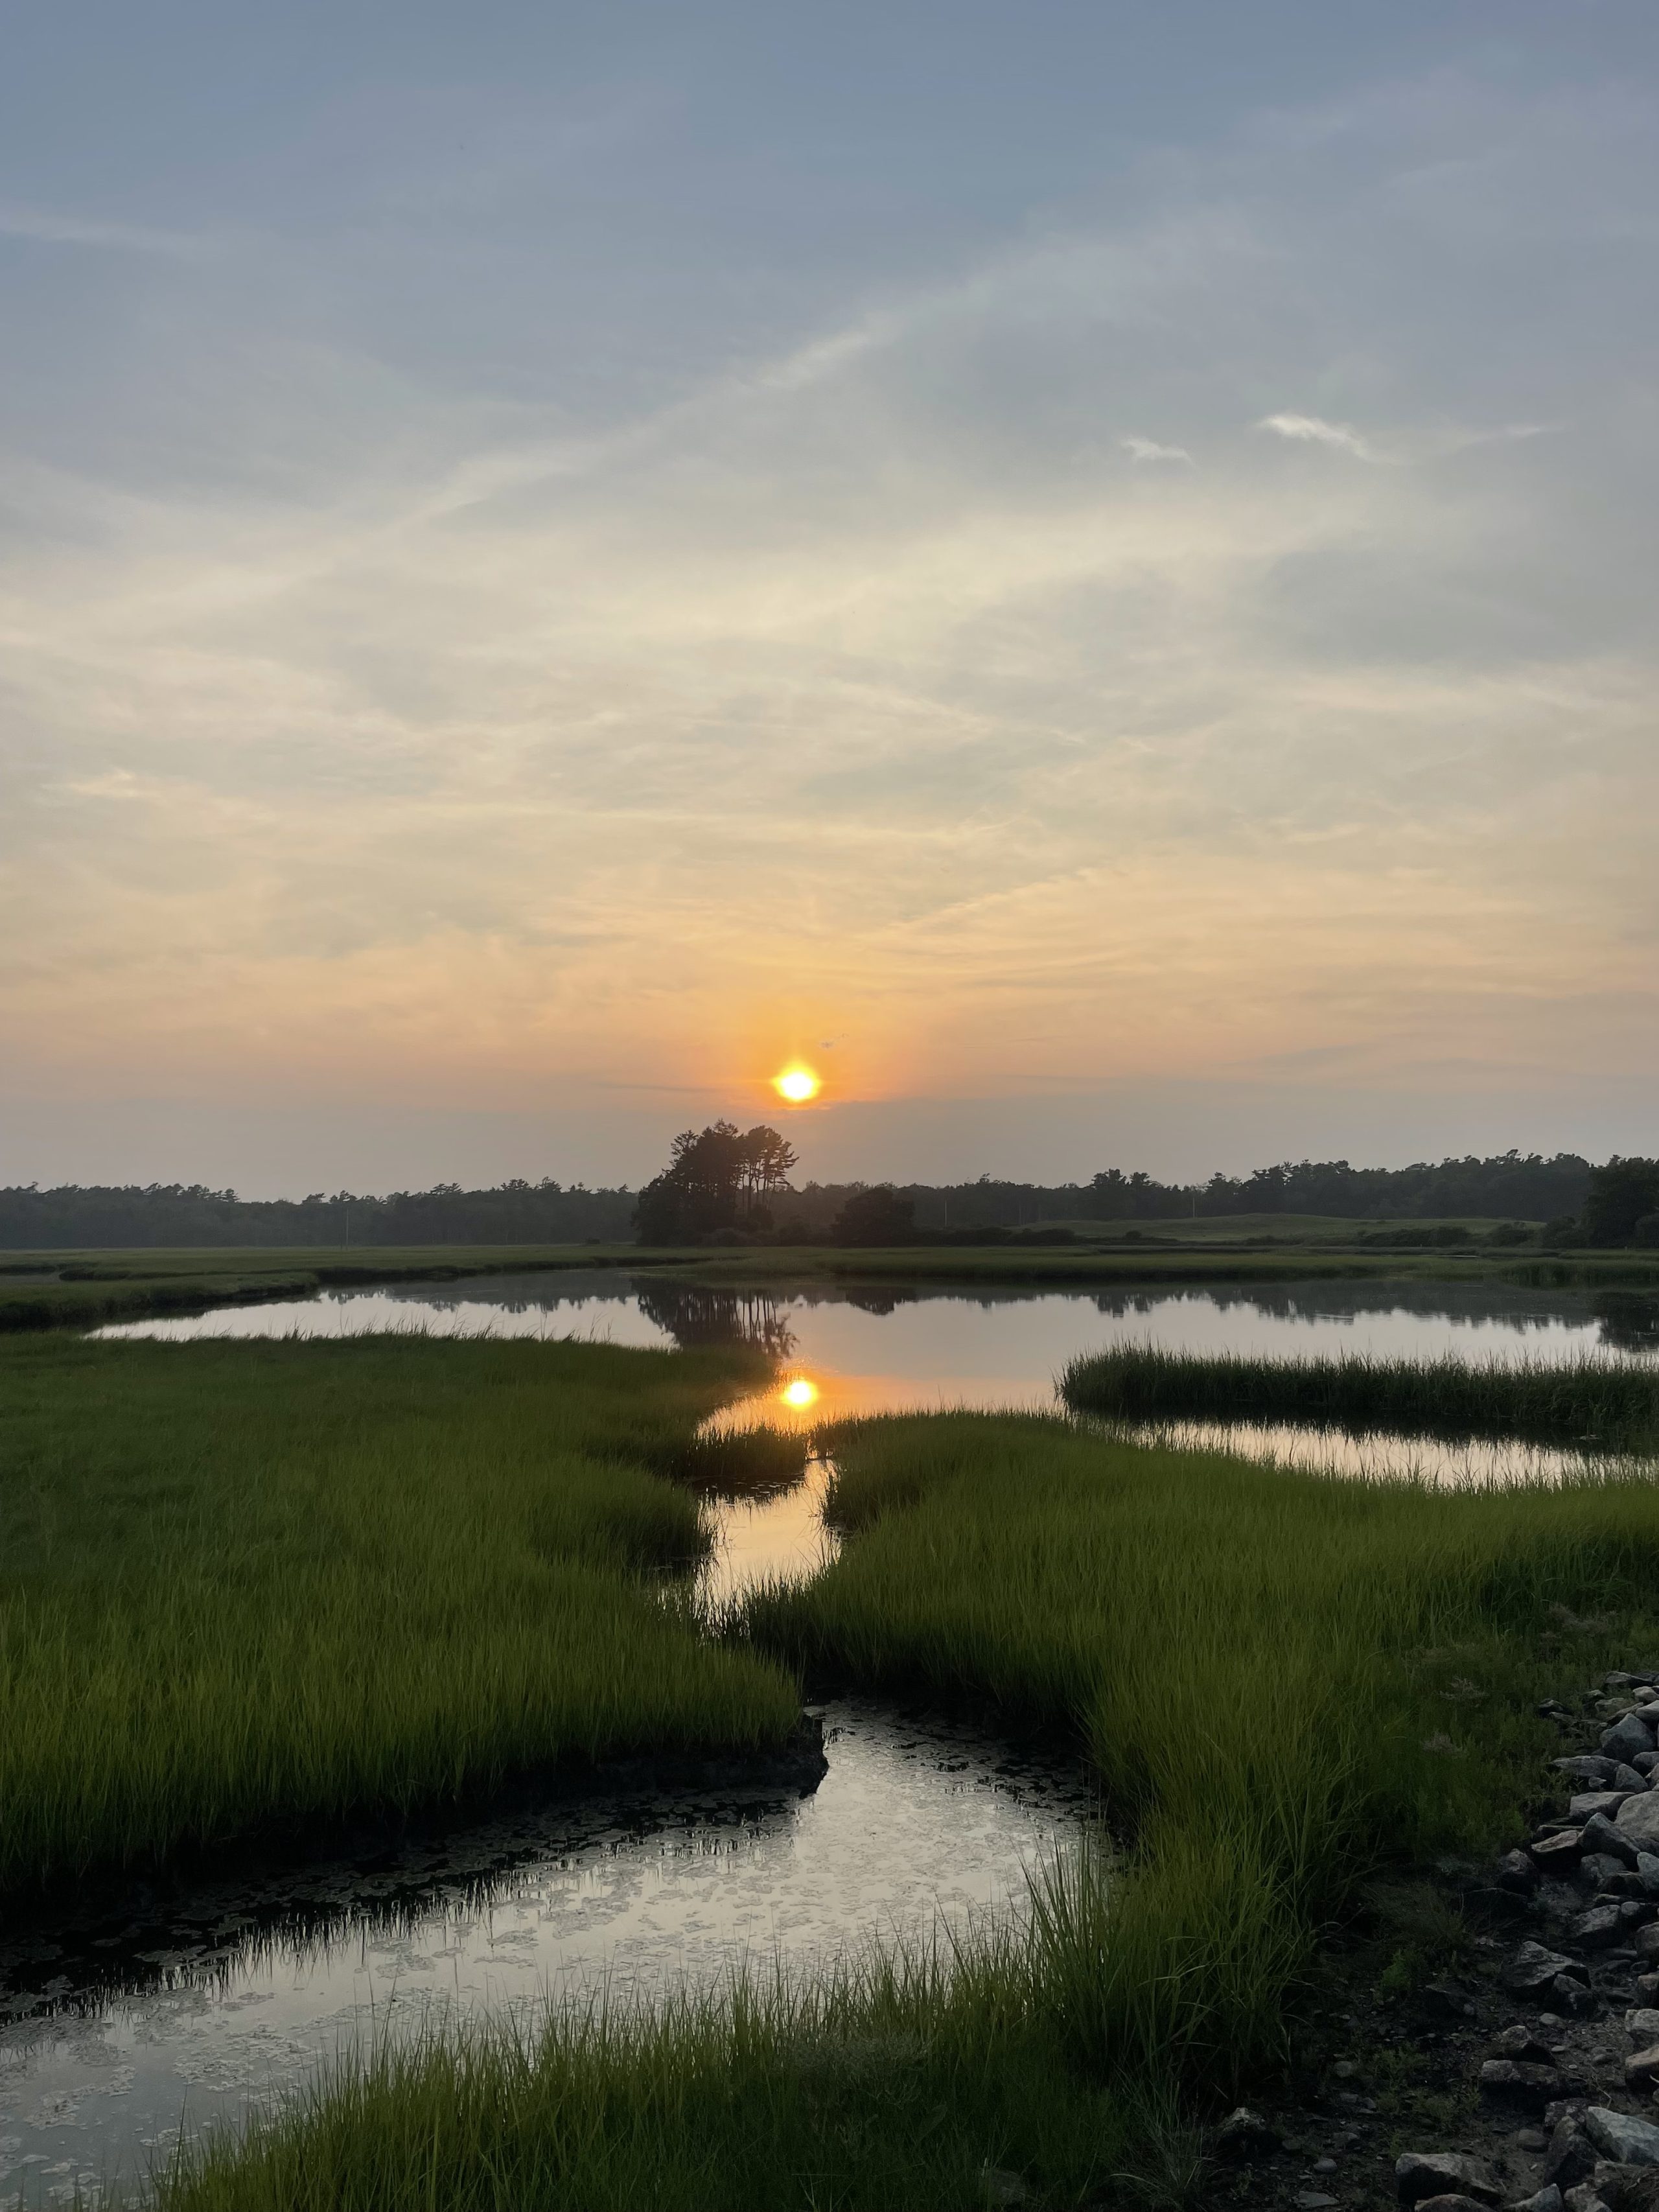 A sunset over a marsh with lush vegetation and placid water.